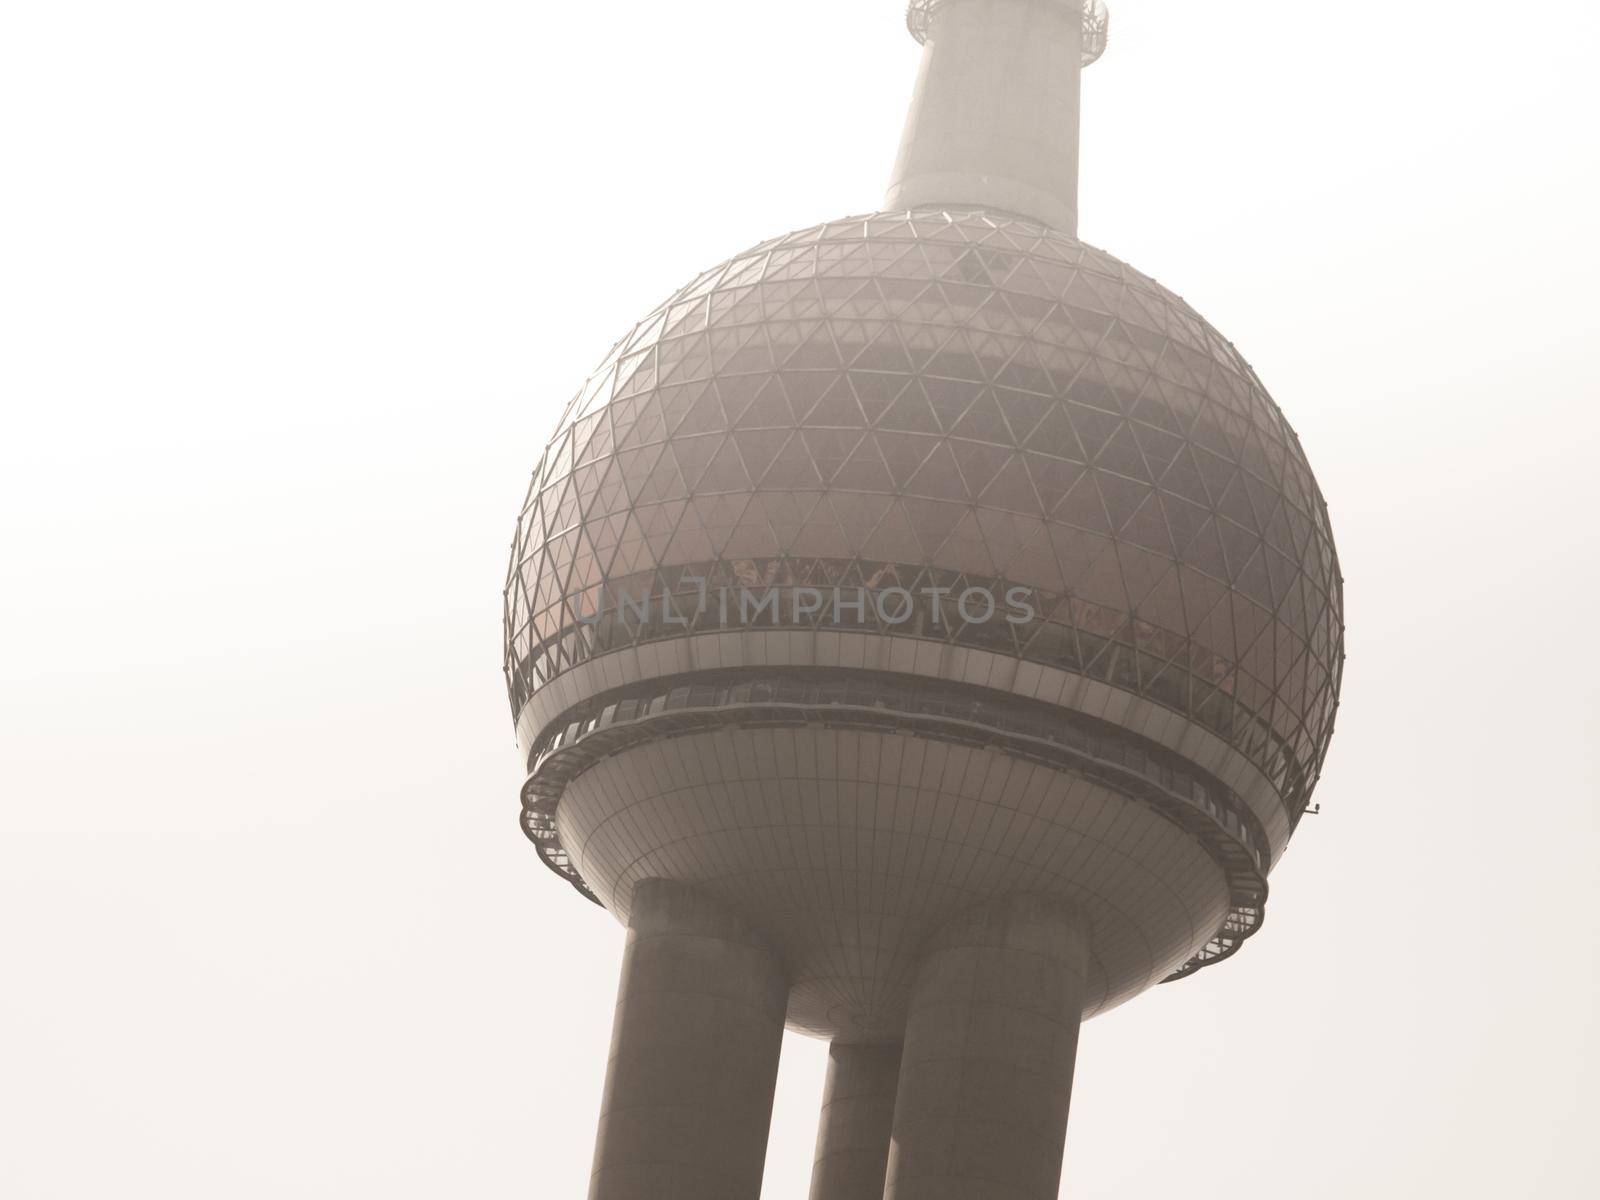 Oriental Pearl TV Tower in Shanghai, China.